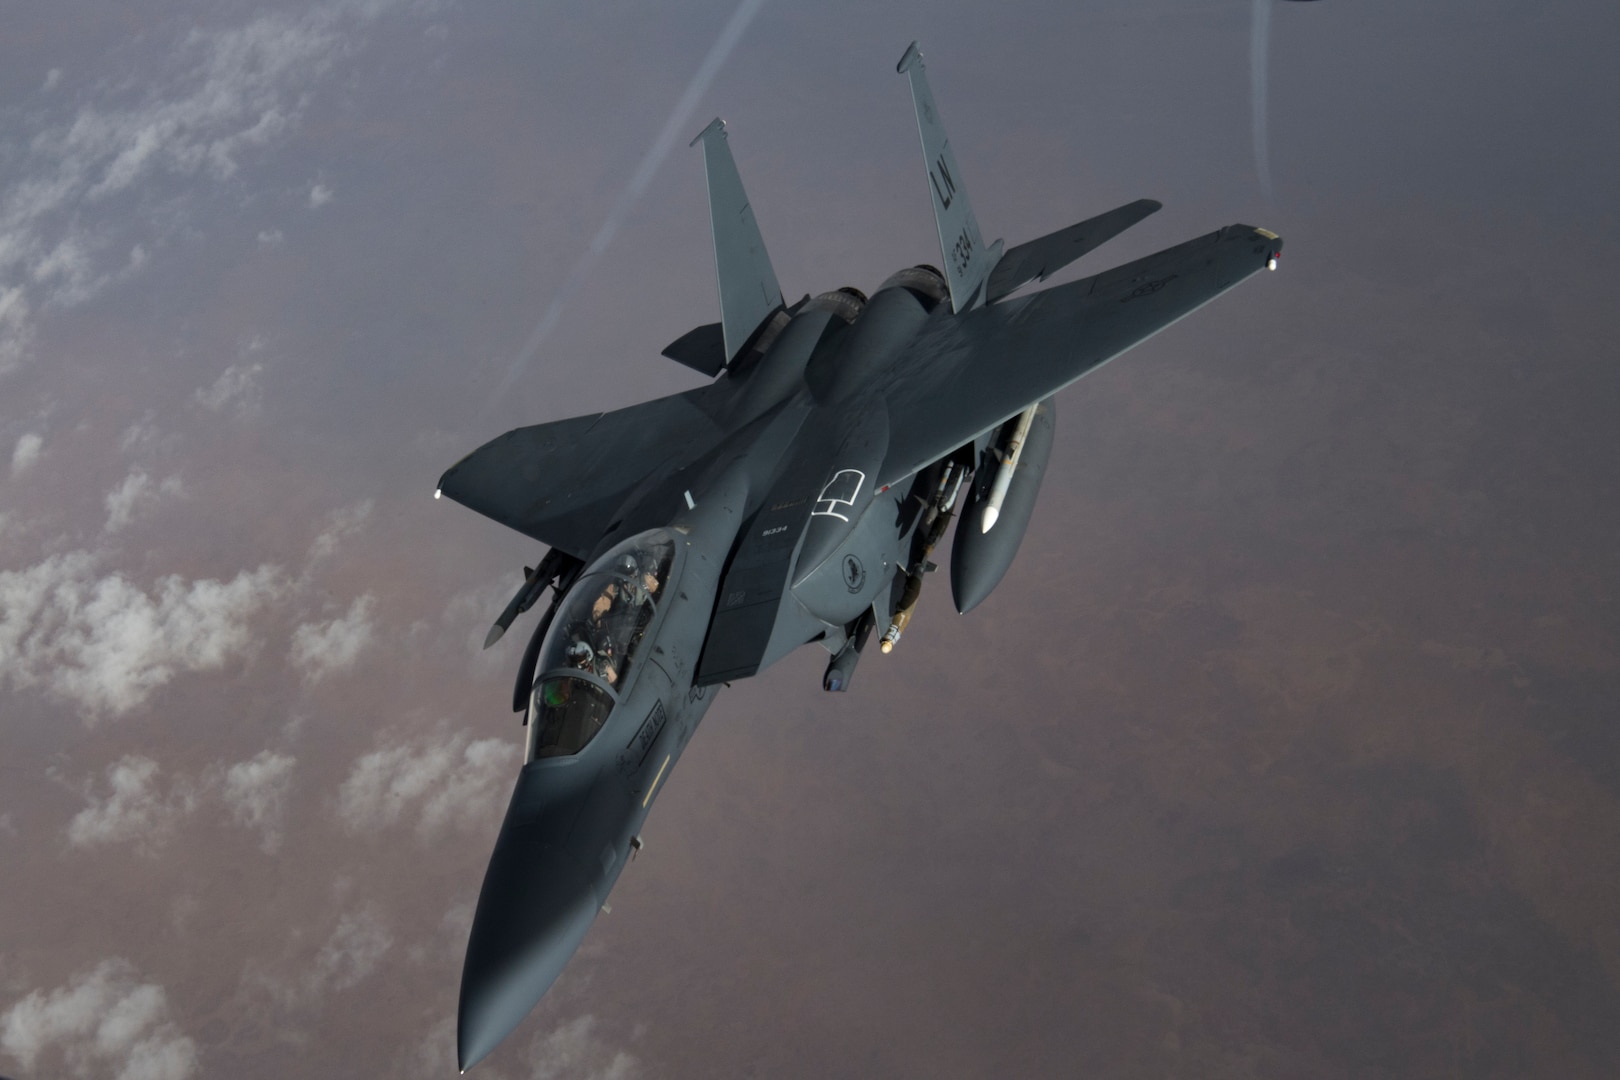 A U.S. Air Force F-15 Strike Eagle flies over northern Iraq, Nov. 6, 2019. U.S. Air Forces Central Command operations deter adversaries and demonstrate support for allies and partners in the region. (U.S. Air Force photo by Staff Sgt. Daniel Snider)